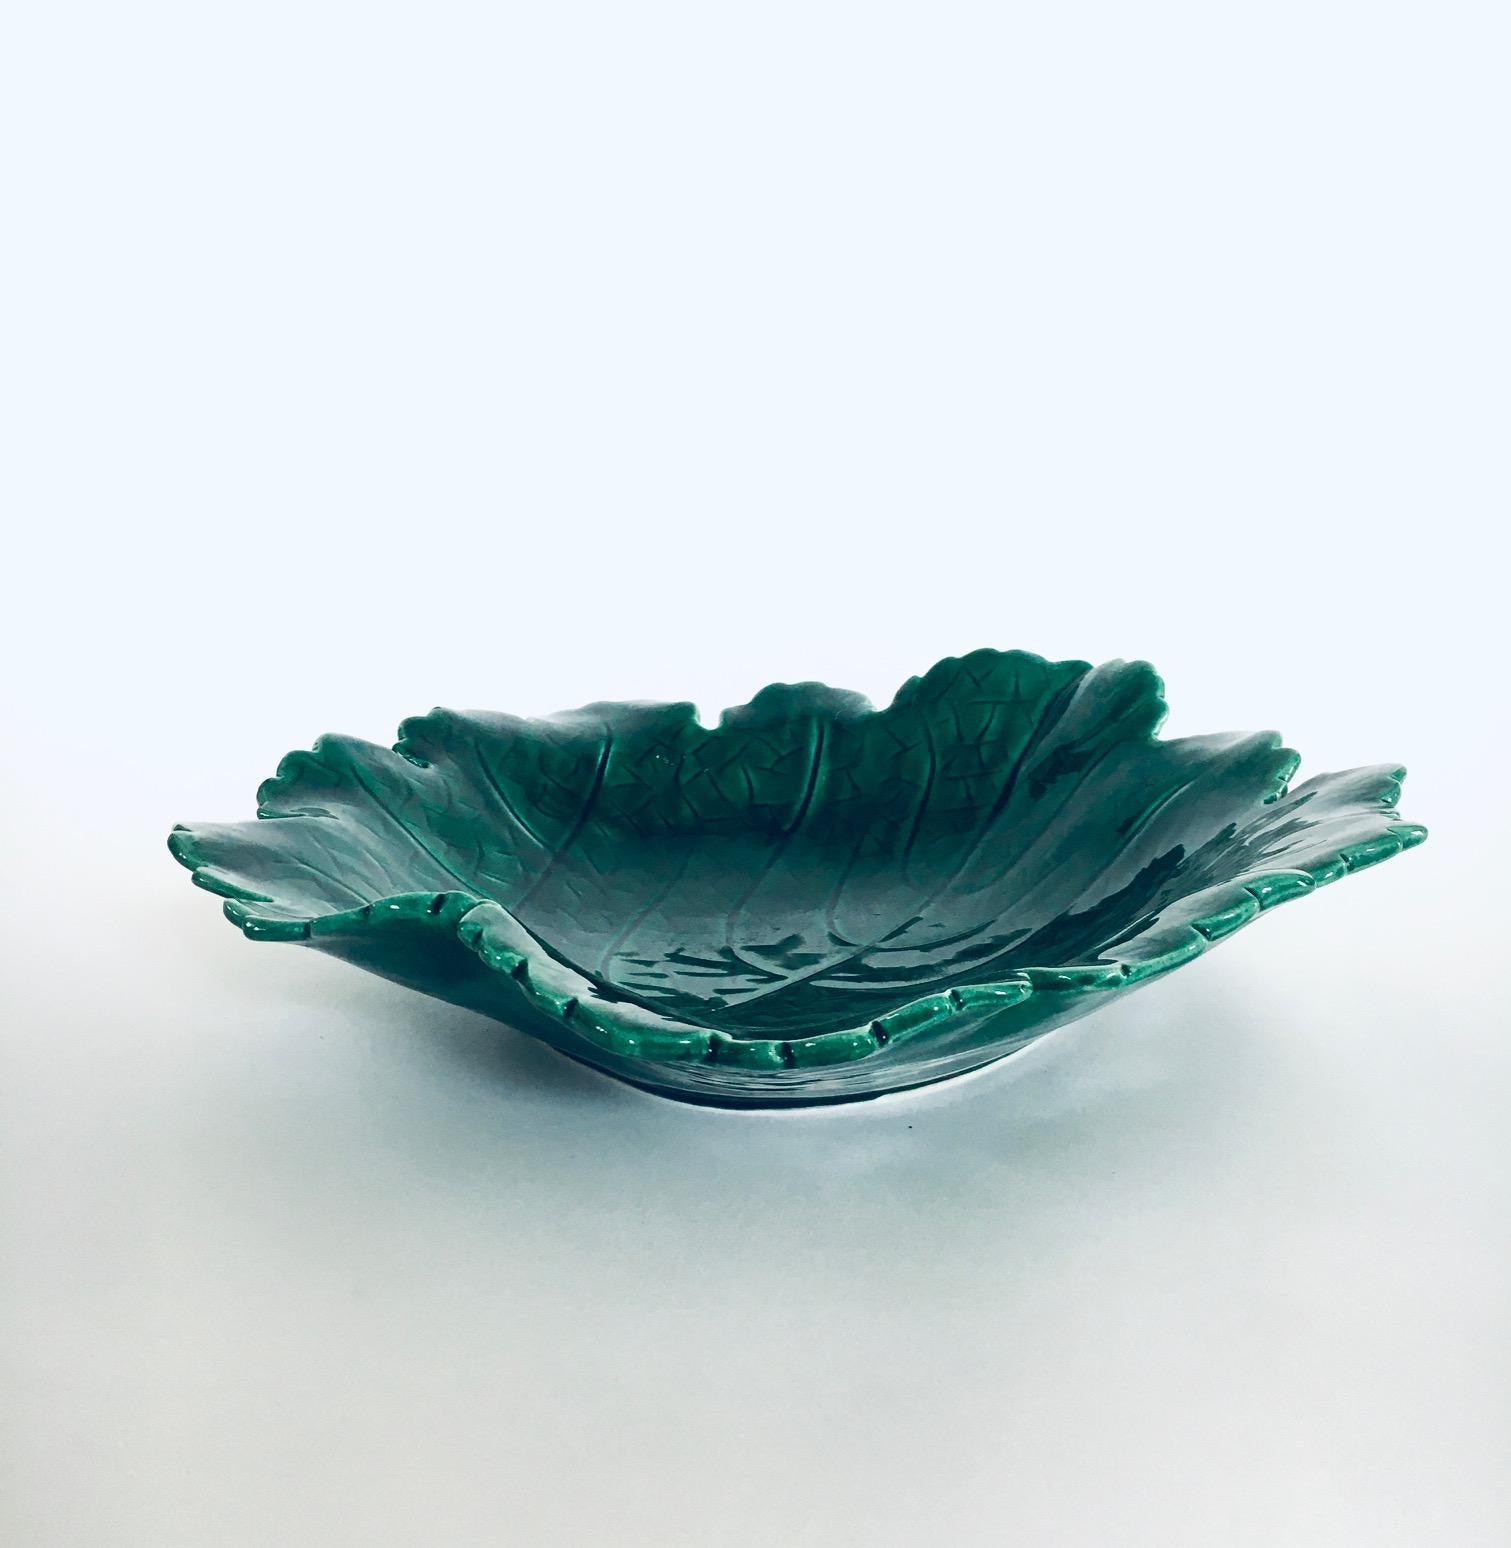 Mid-20th Century Vintage Studio Pottery Leaf Bowl by Albert Ferlay, Vallauris France 1960's For Sale